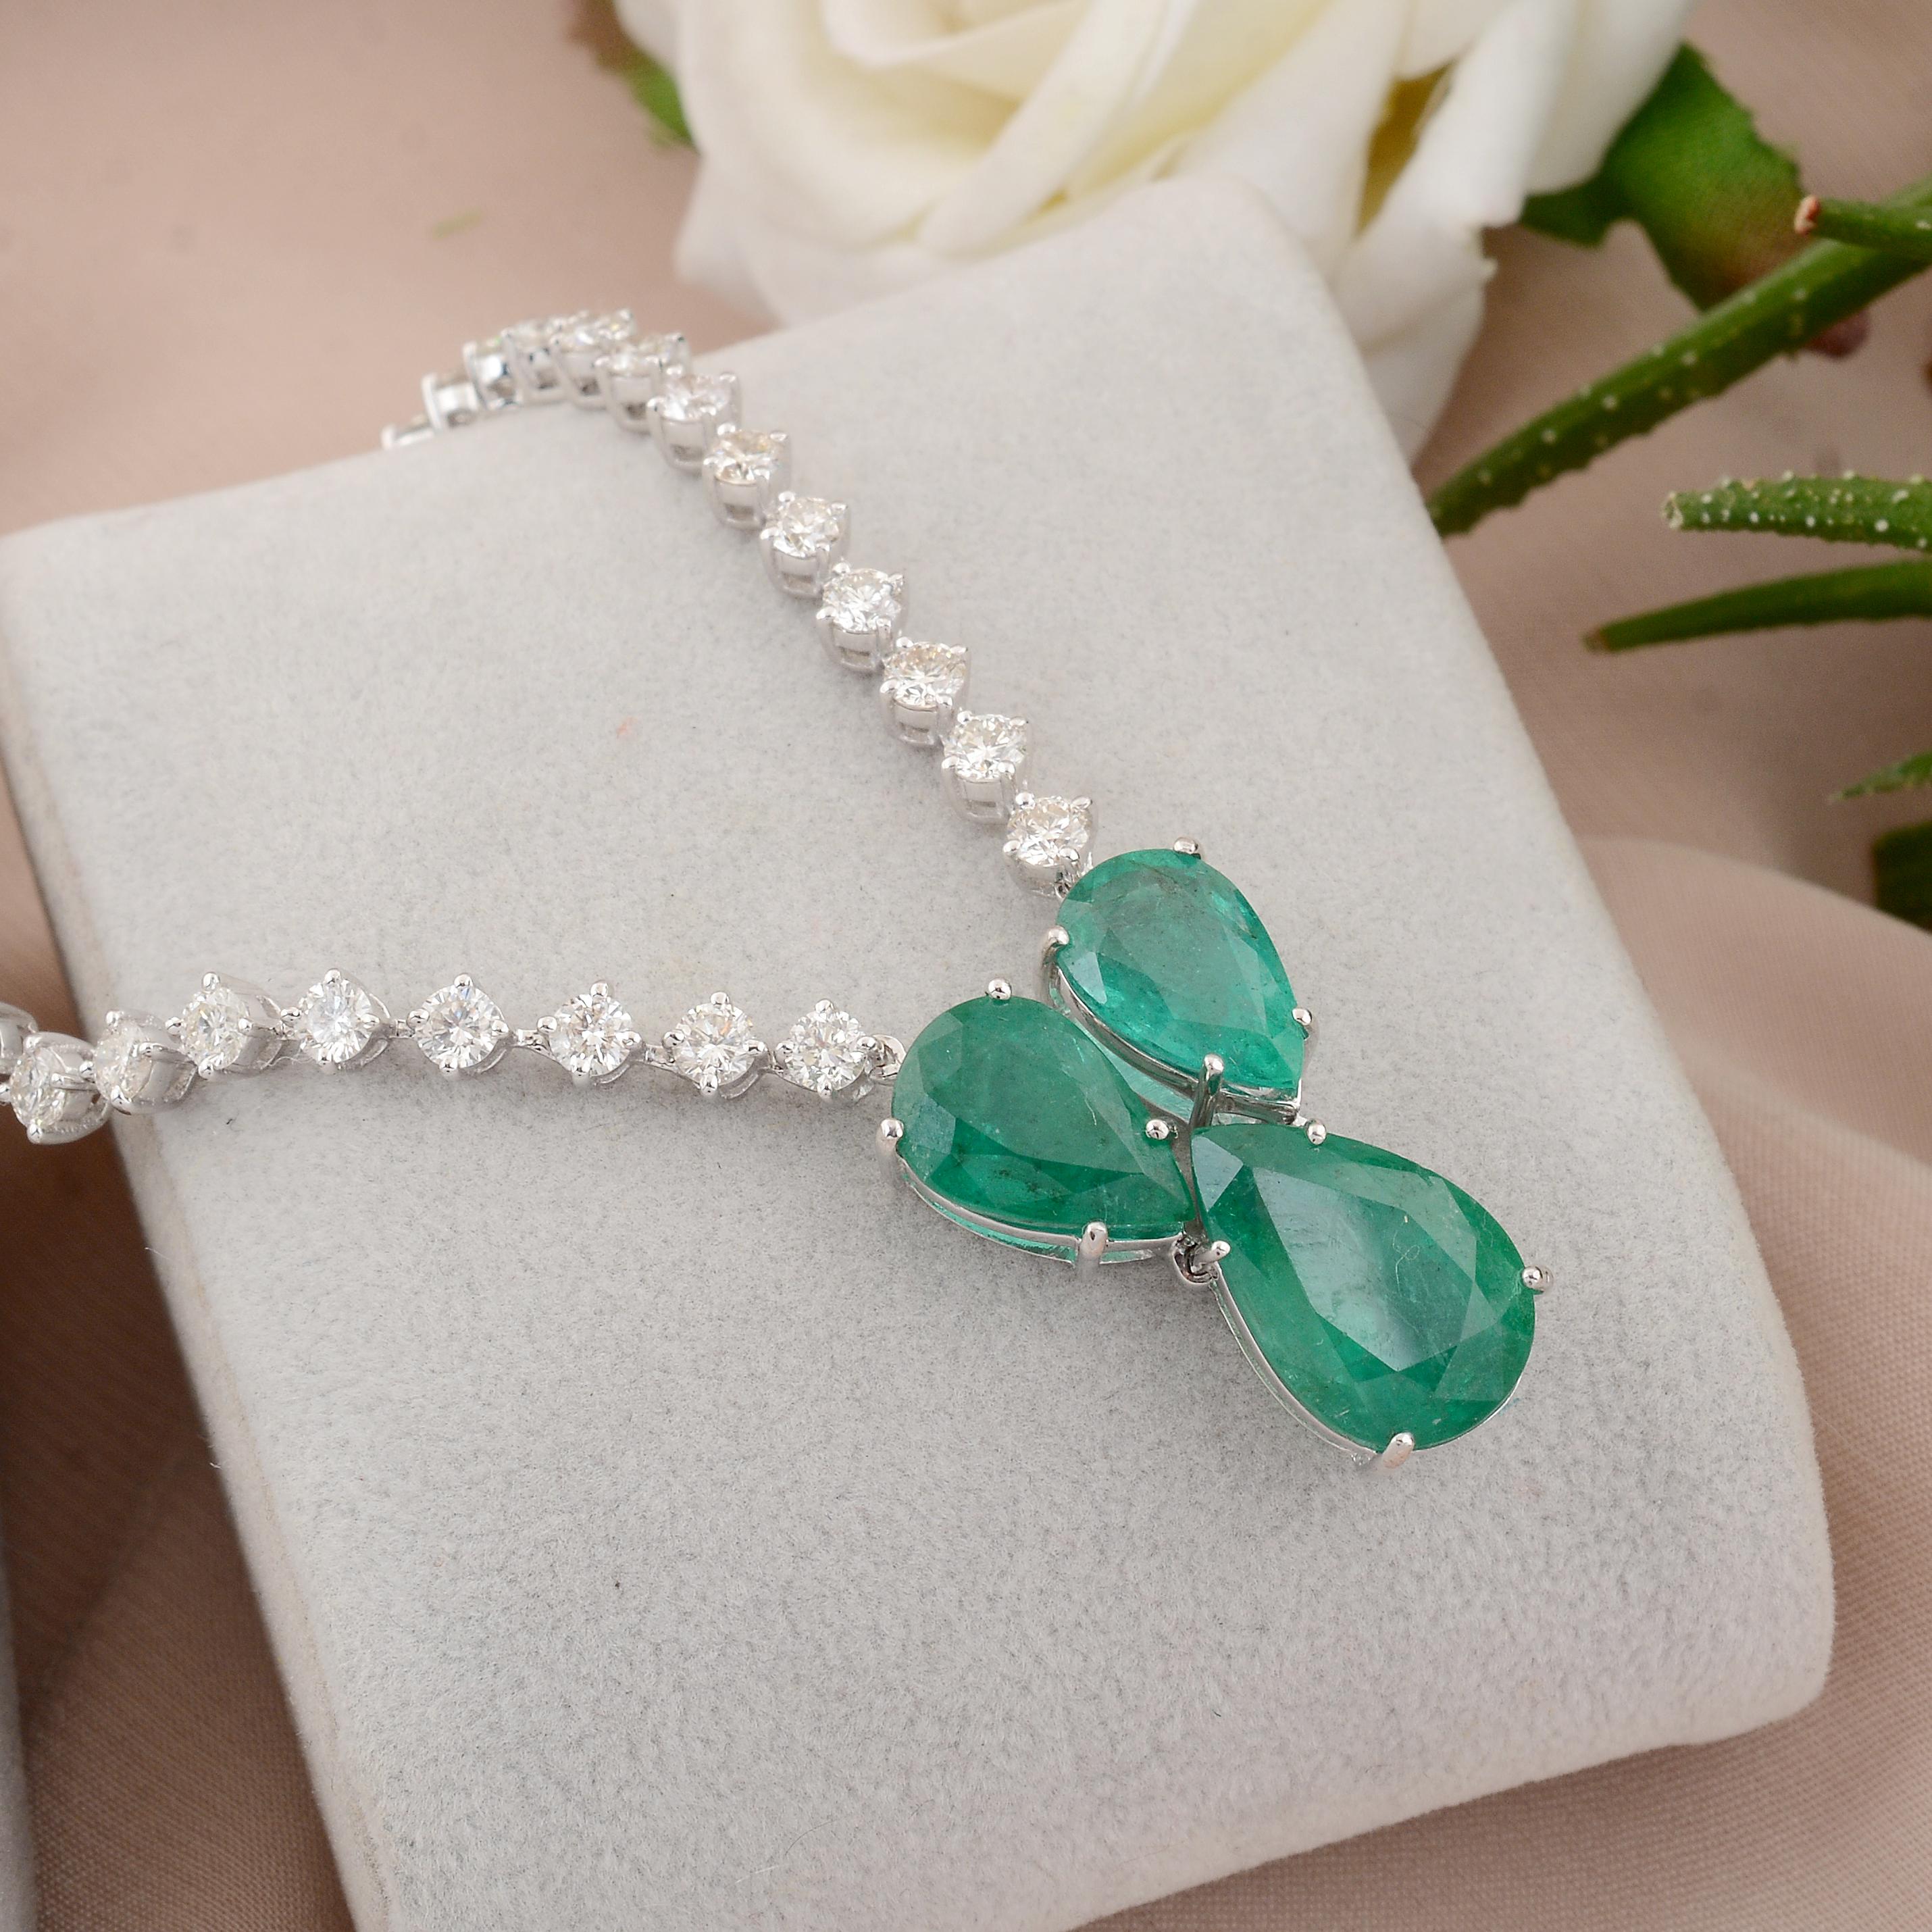 A charm necklace featuring a Zambian emerald gemstone and diamonds in 14 karat white gold is a stunning and elegant piece of fine jewelry. The necklace typically showcases a Zambian emerald as the central charm or pendant element, complemented by